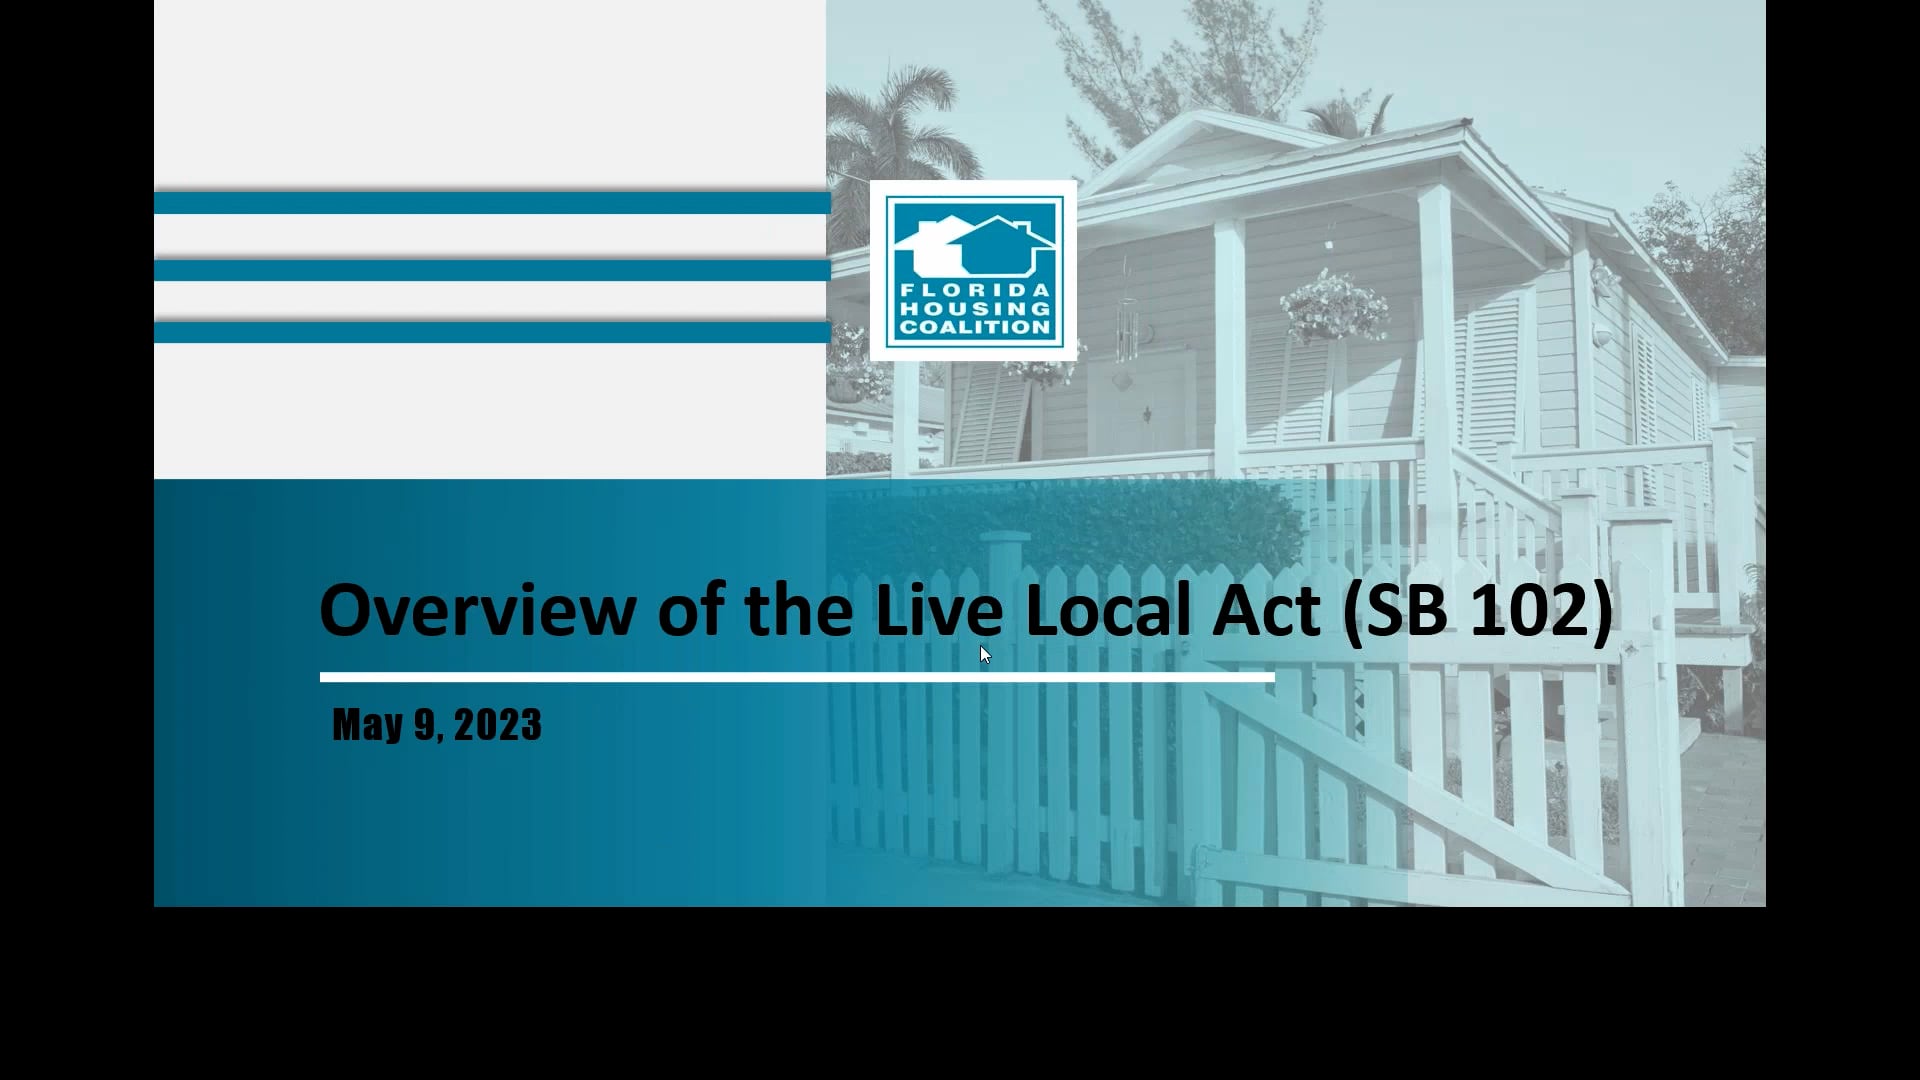 Overview of the Live Local Act on Vimeo